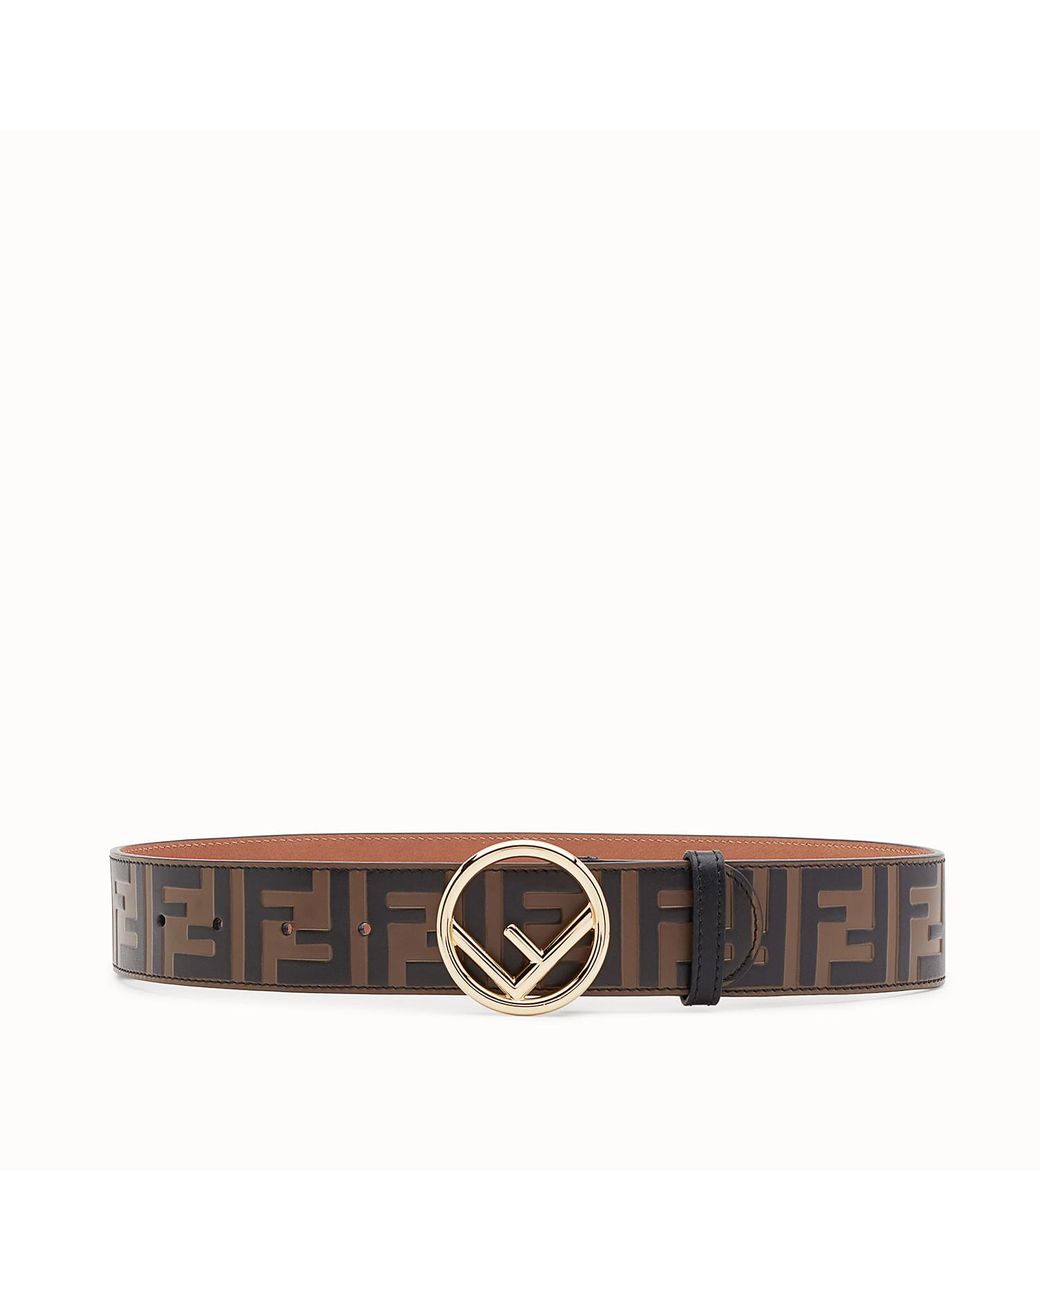 Fendi Leather F Is Buckle Belt in Cocoa (Brown) - Save 29% - Lyst